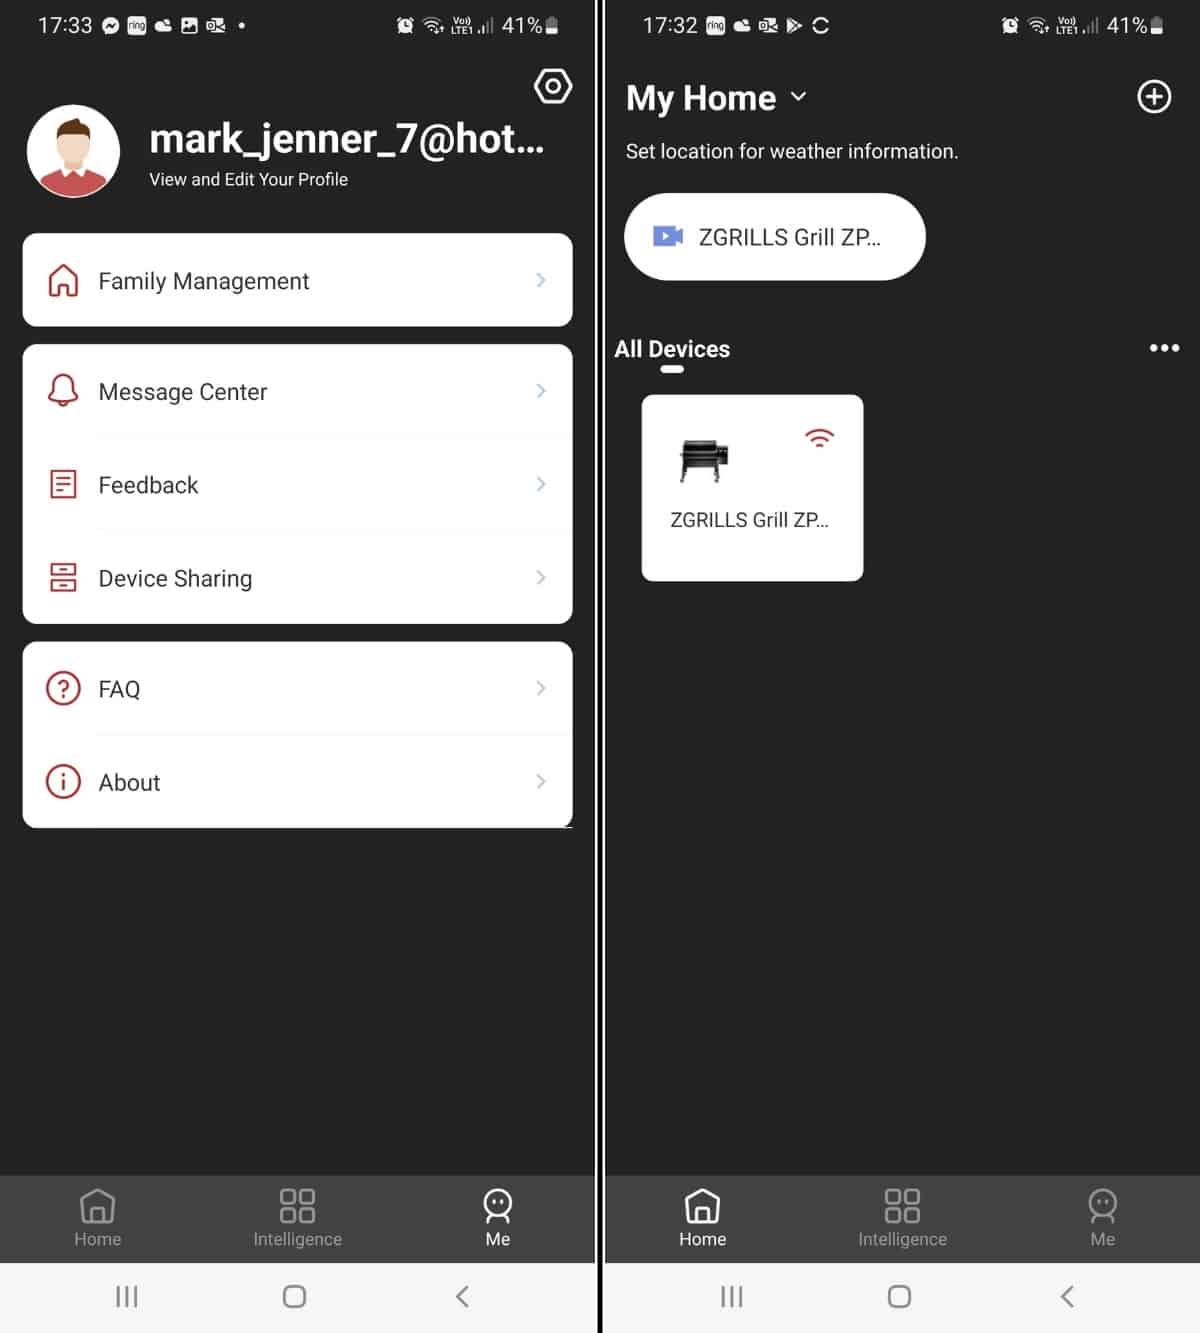 z grills smartphone app screenshots showing the settings available